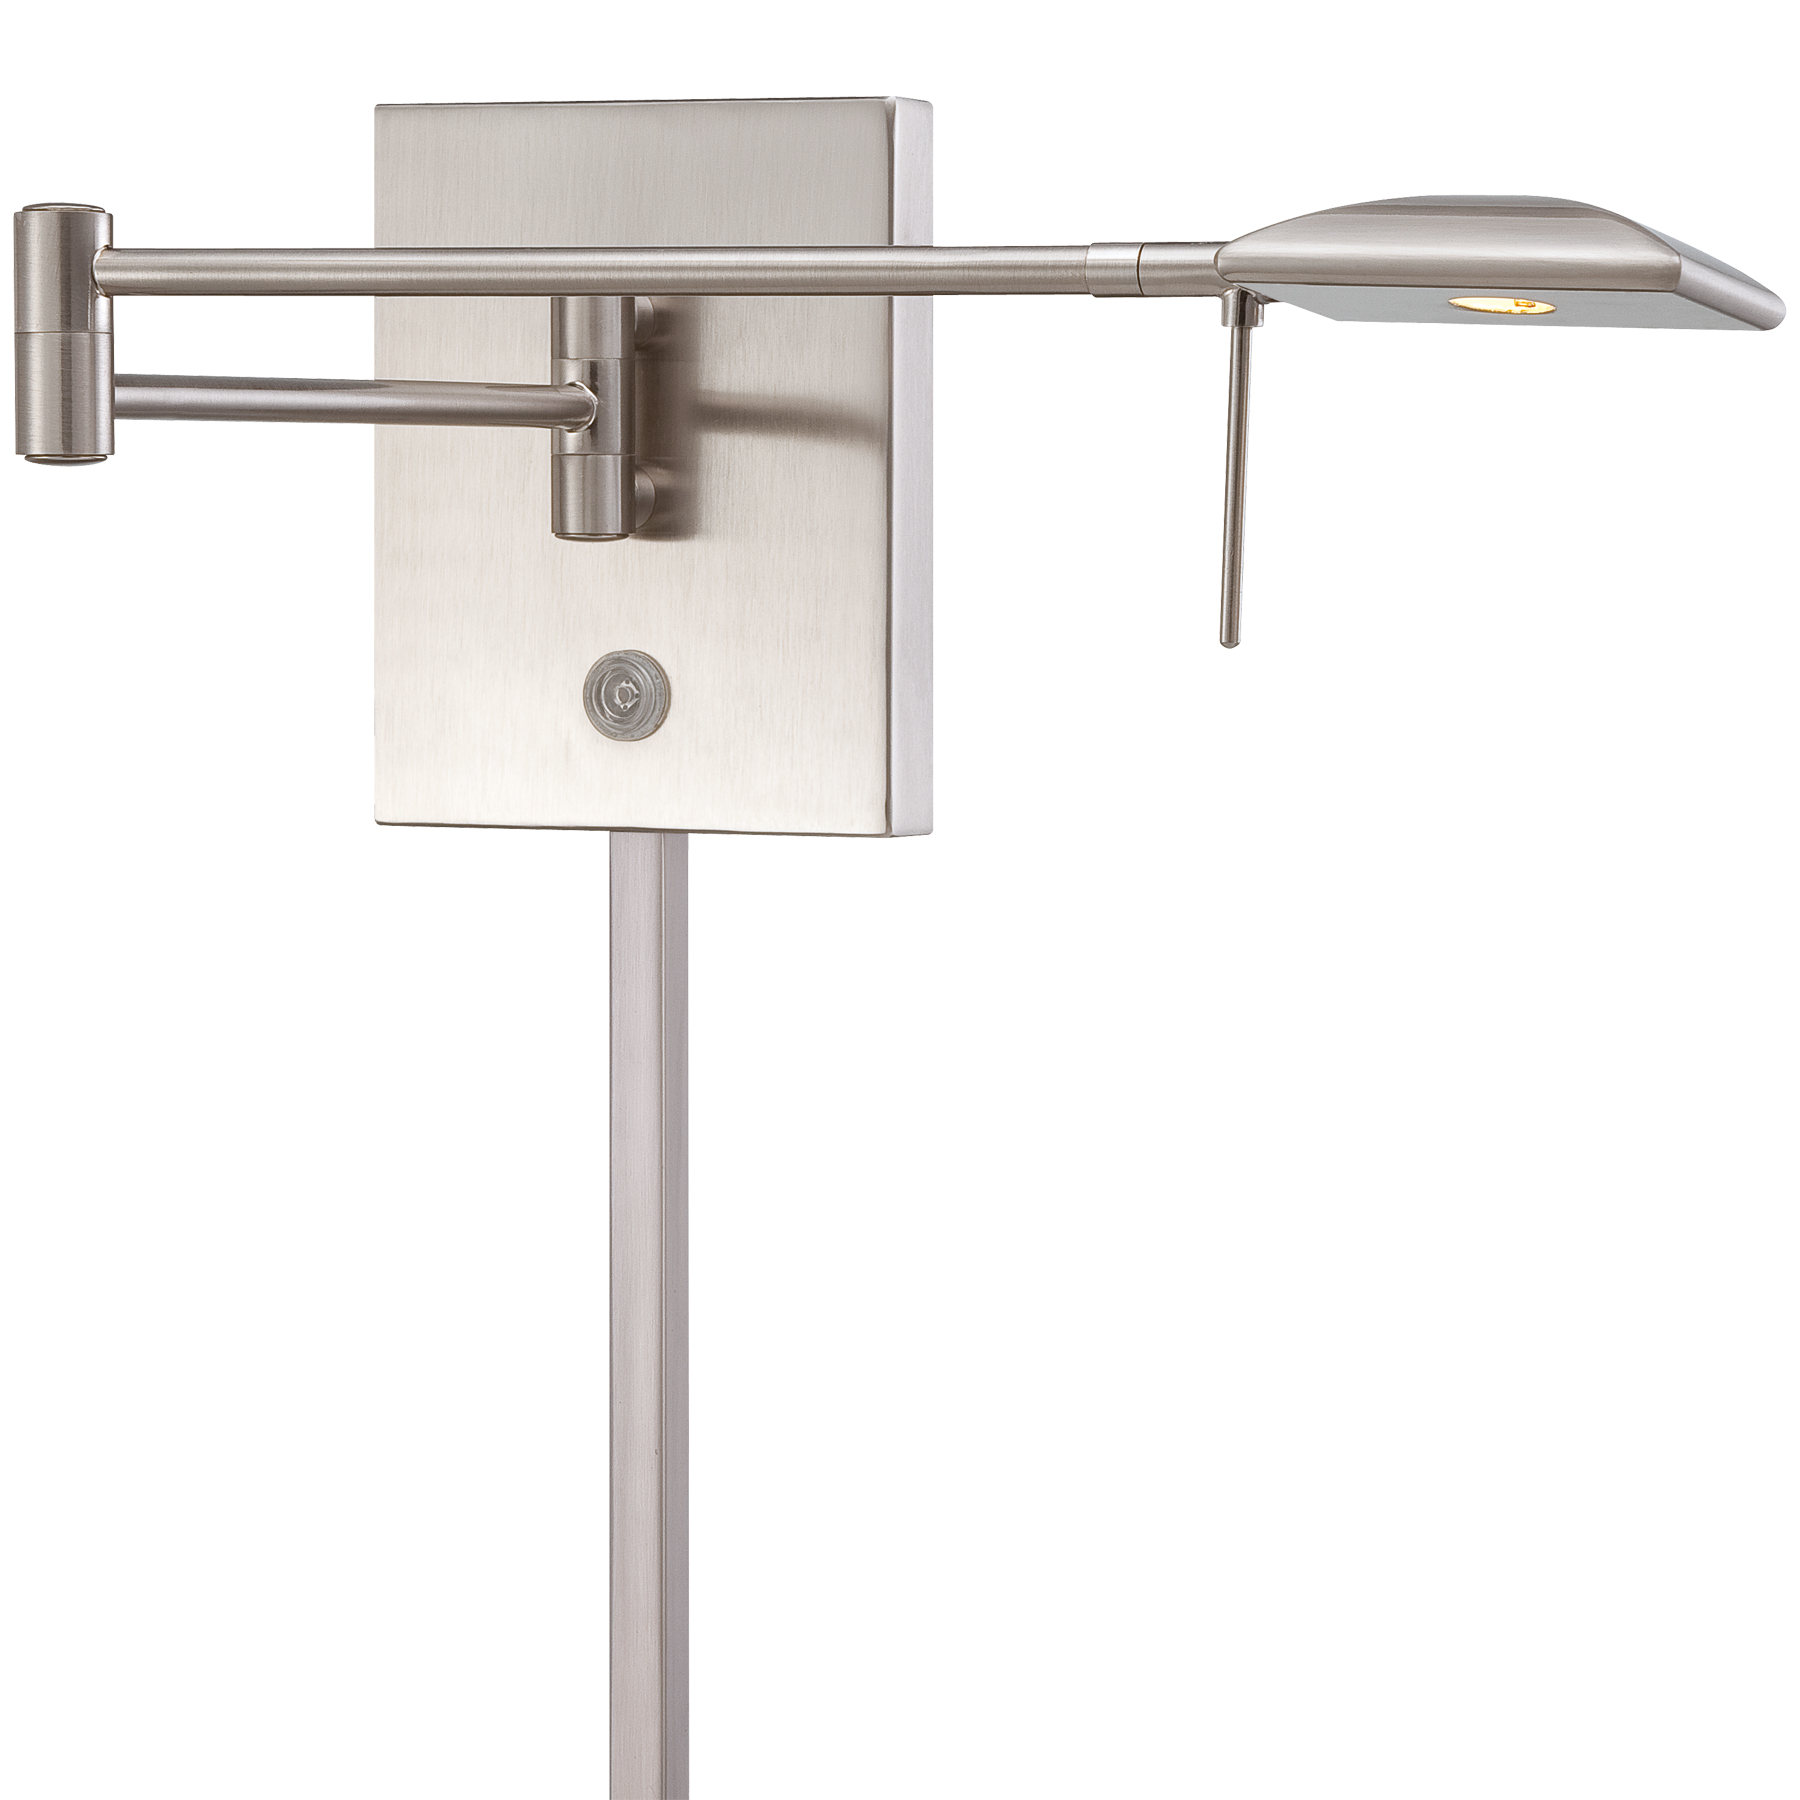 P4328 LED Swing Arm Wall Sconce by George Kovacs P4328-084 GKV63786